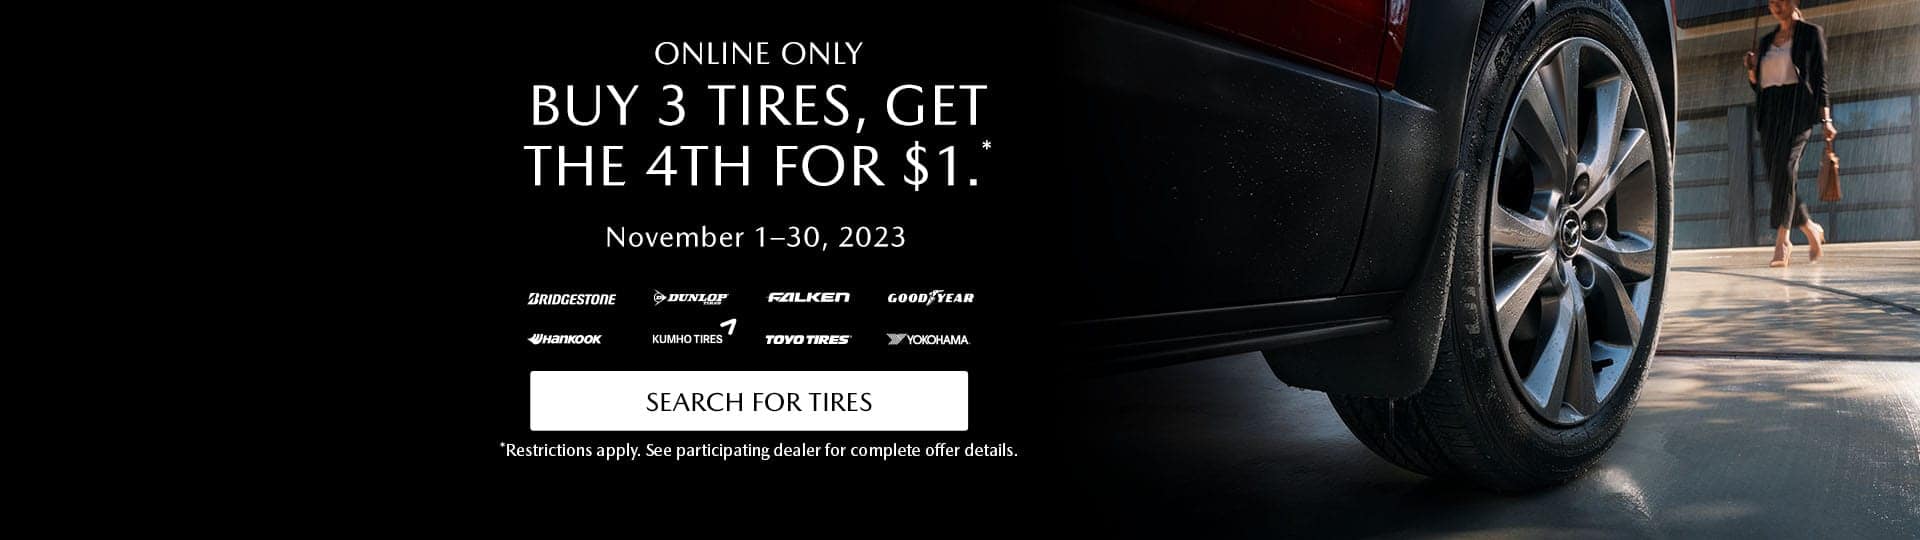 Buy 3 Tires get the 4th for $1